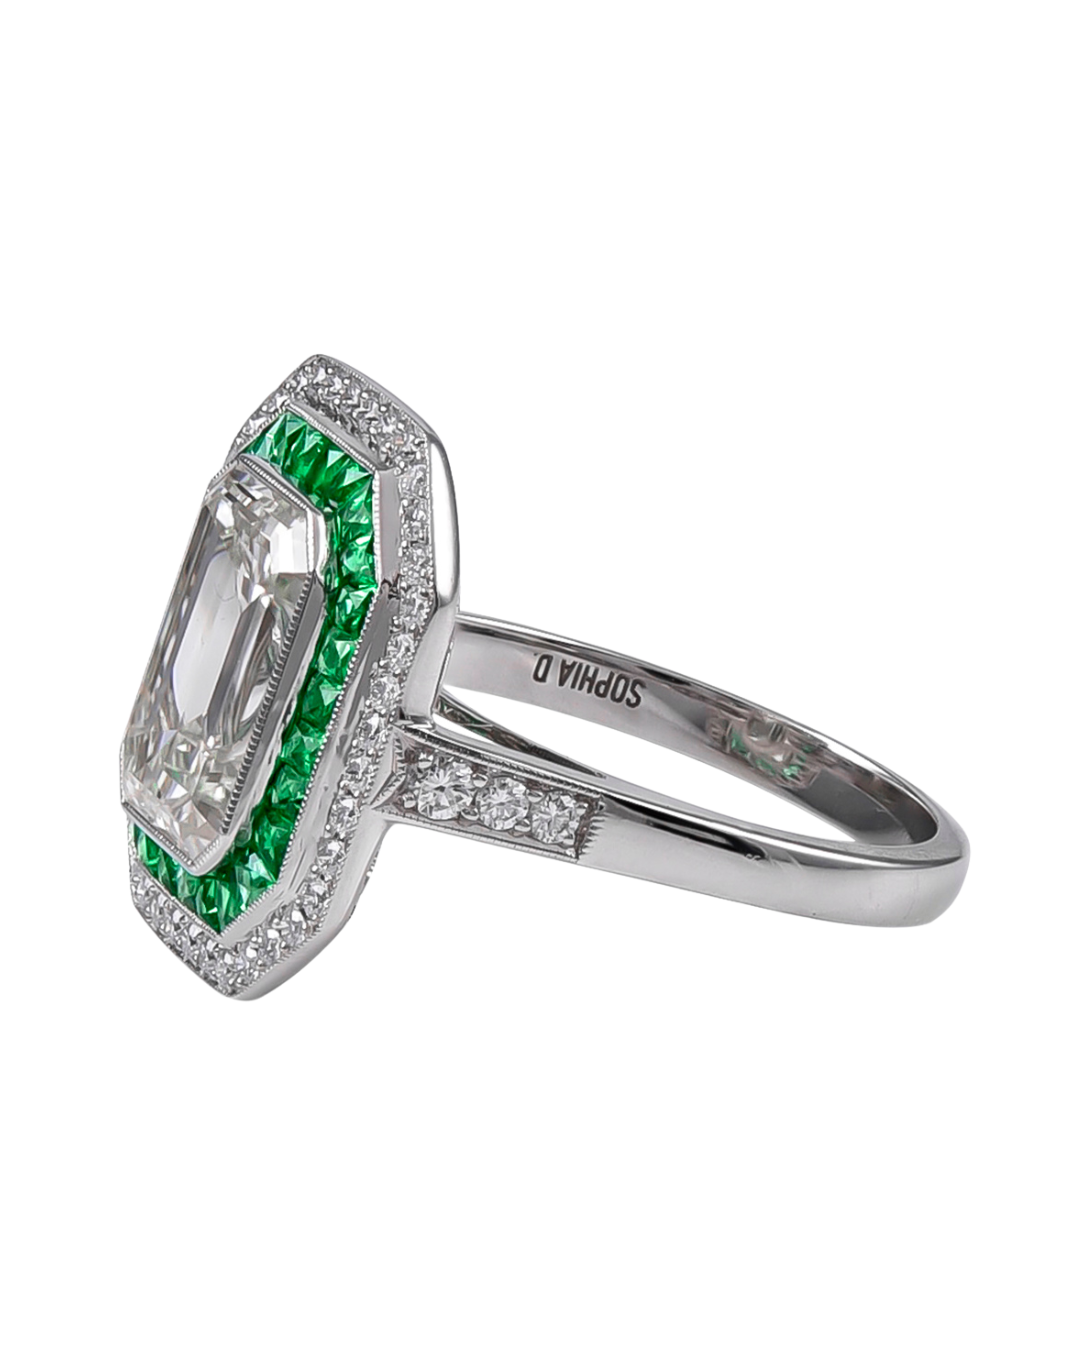 Sophia D. Emerald Cut Diamond Ring with French Cut Emerald Halo and Diamond Halo